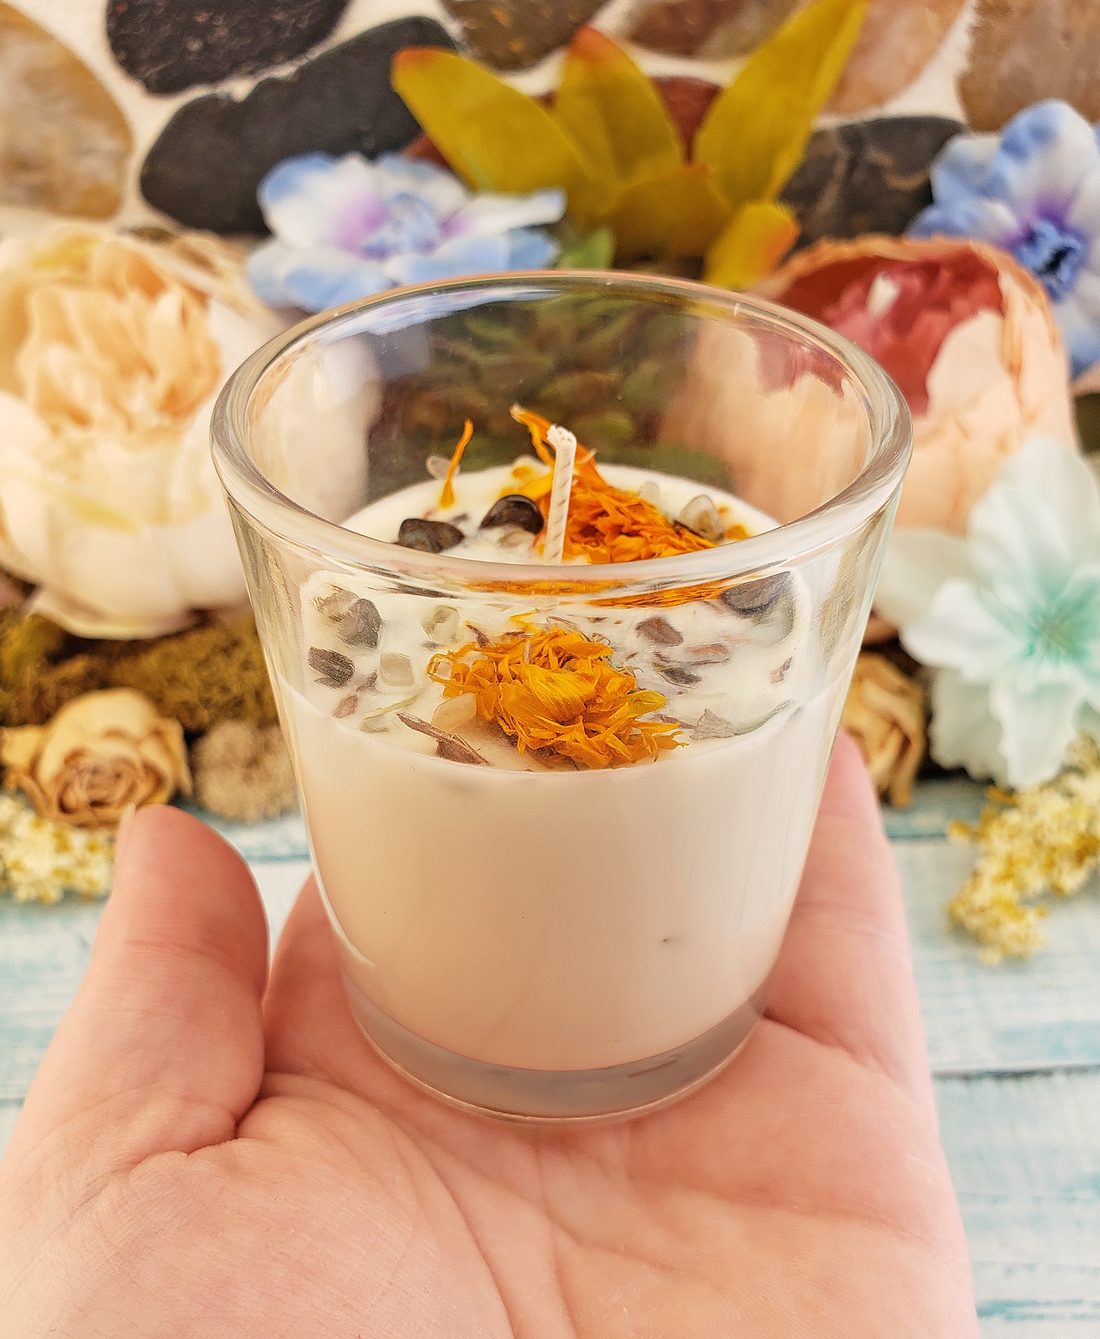 Coconut Soy Wax Handmade Scented Votive Candle & Gem Chips - Strength - Scented with Essential Oils - Decorated with Dried Herbs and Crystal Chips - Bronzite